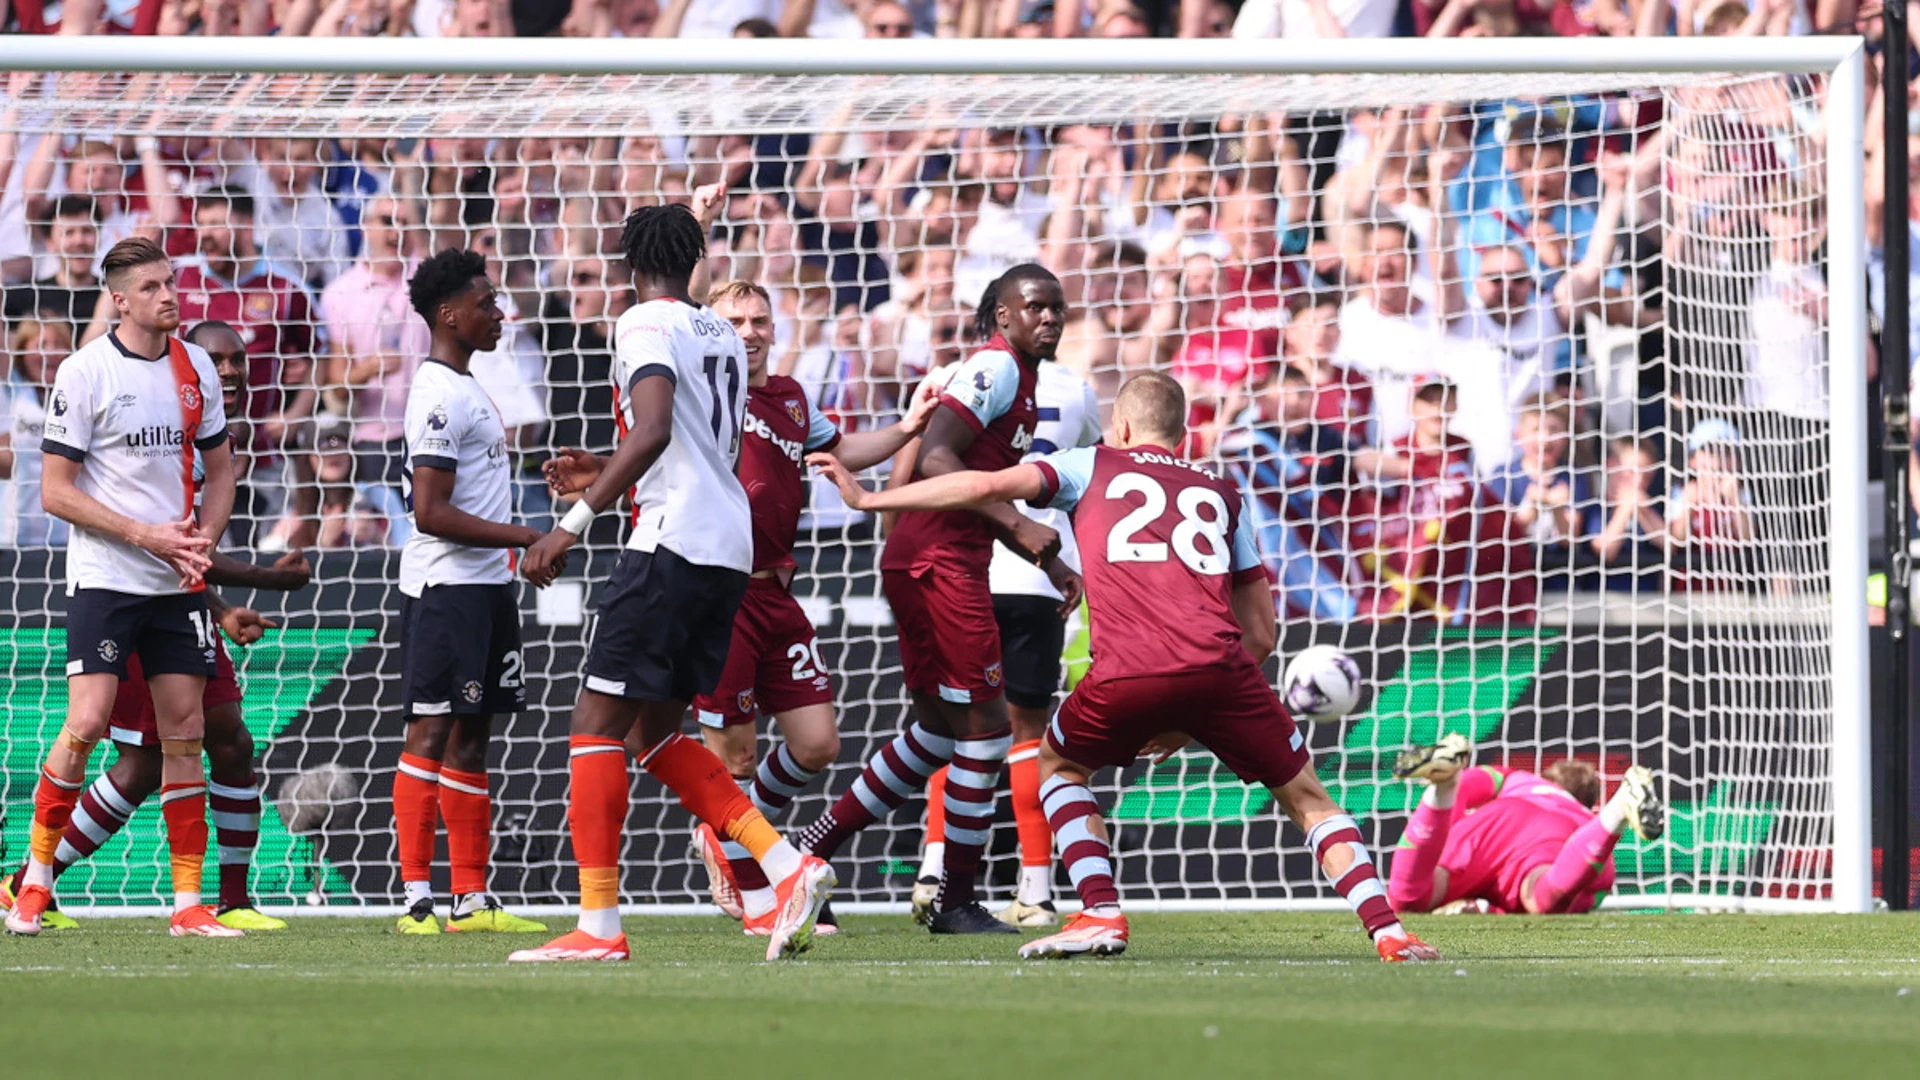 West Ham deal hammer blow to Luton's survival hopes with win